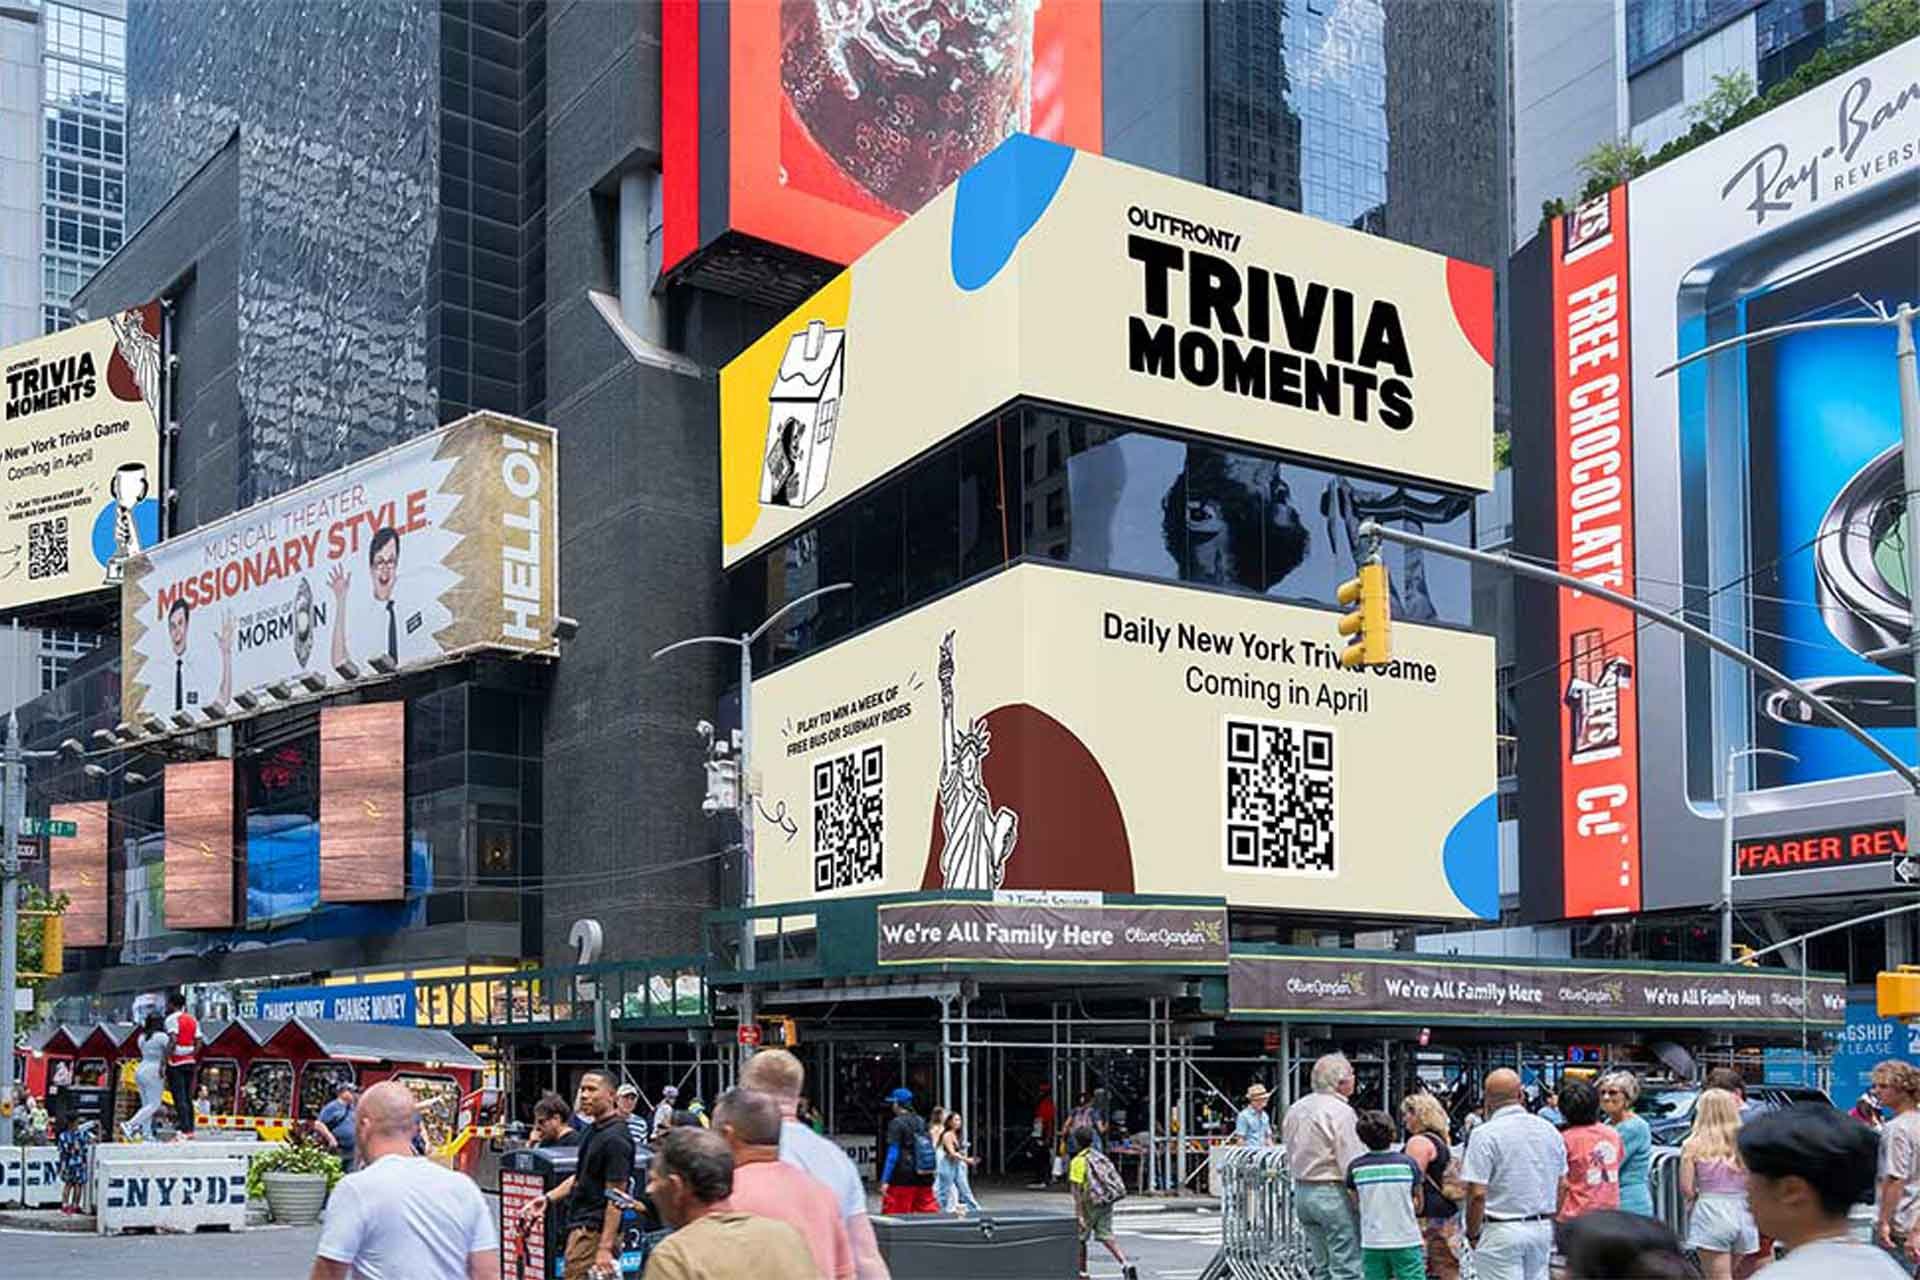 out of home digital billboard advertising trivia moments new york city